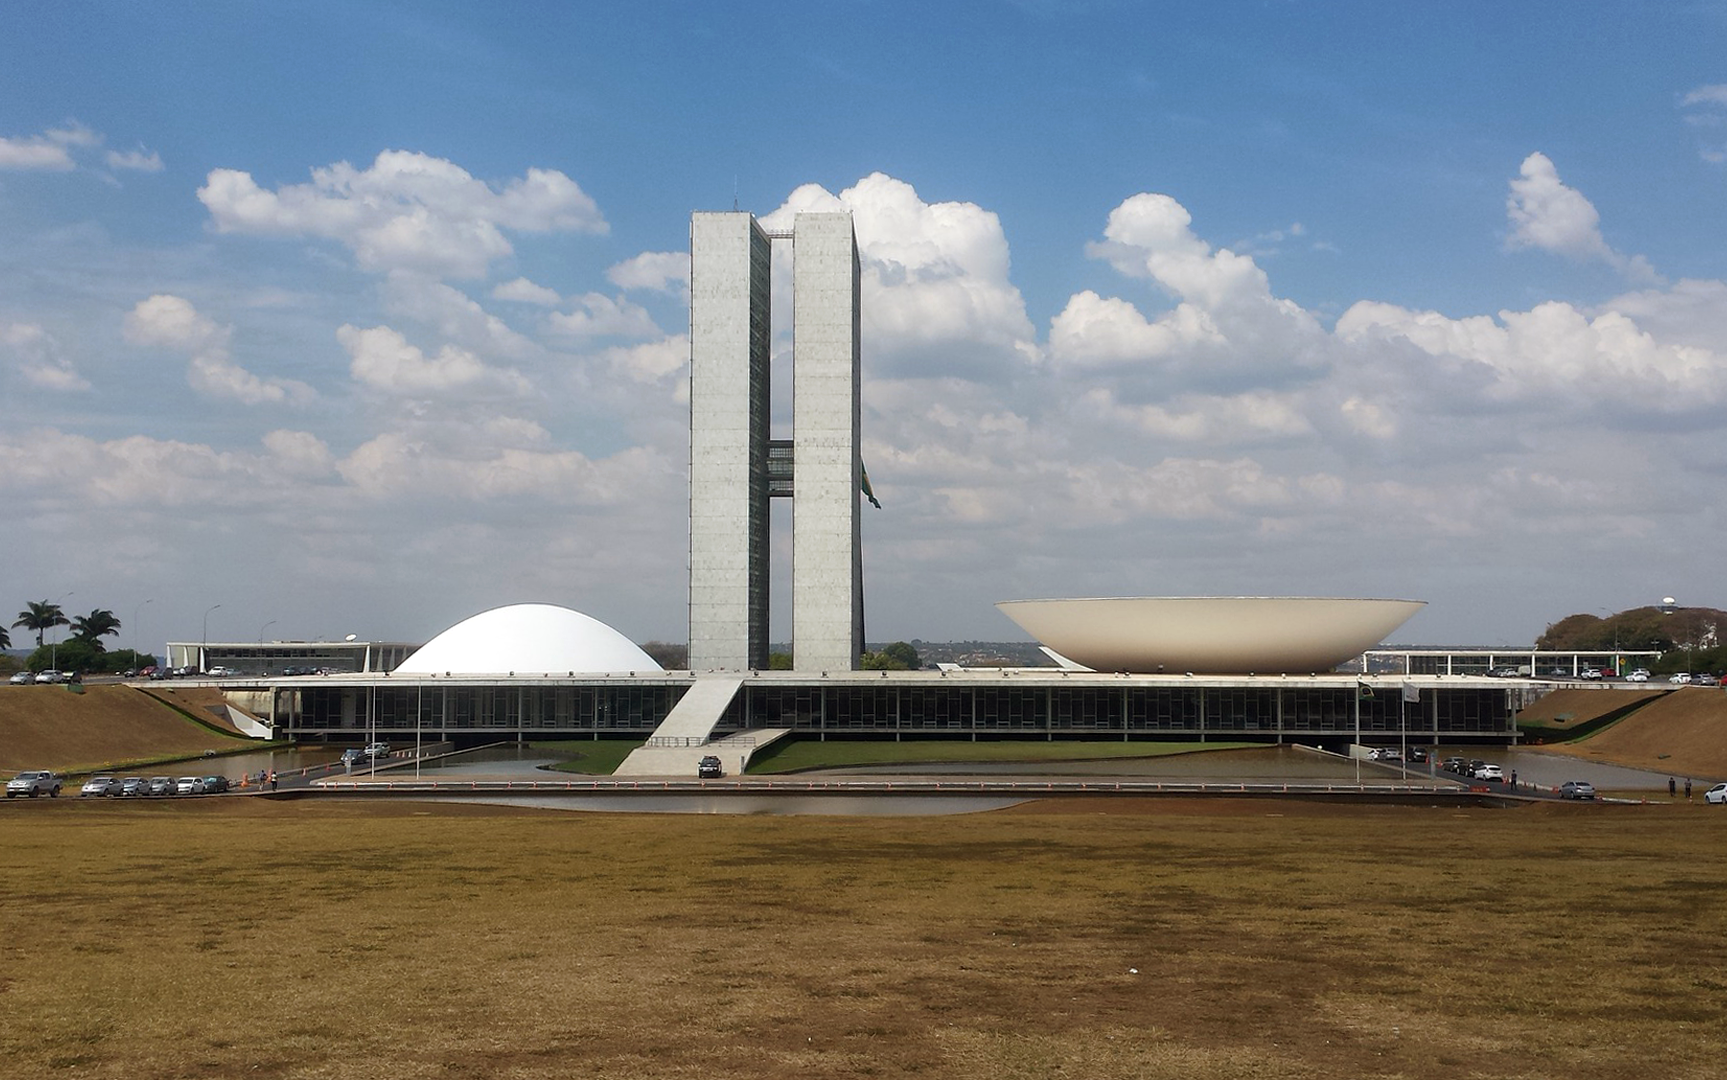 Picture of the National Congress building located in Brasilia.